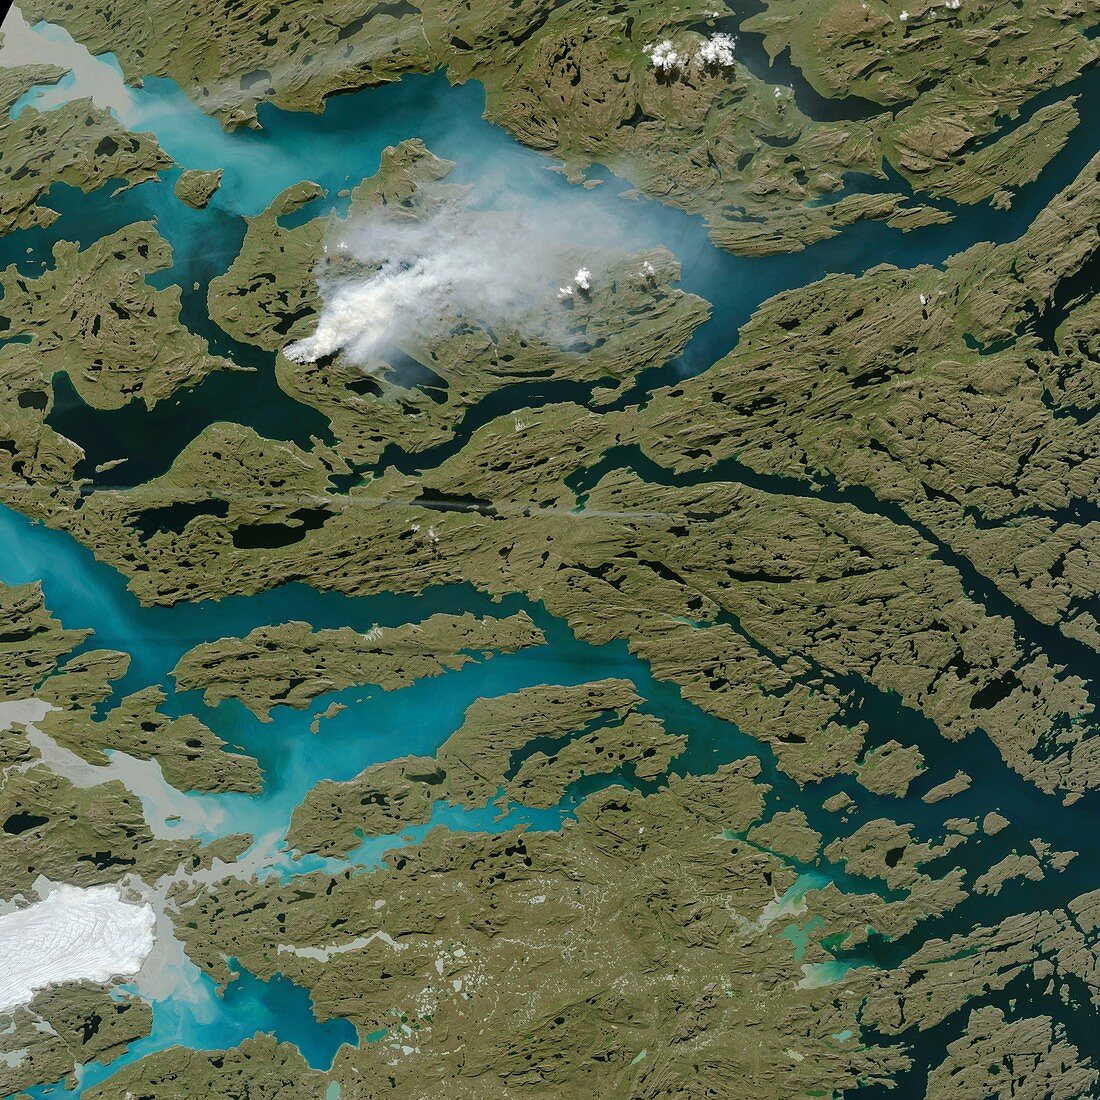 Wildfire in Greenland in August 2017, satellite image